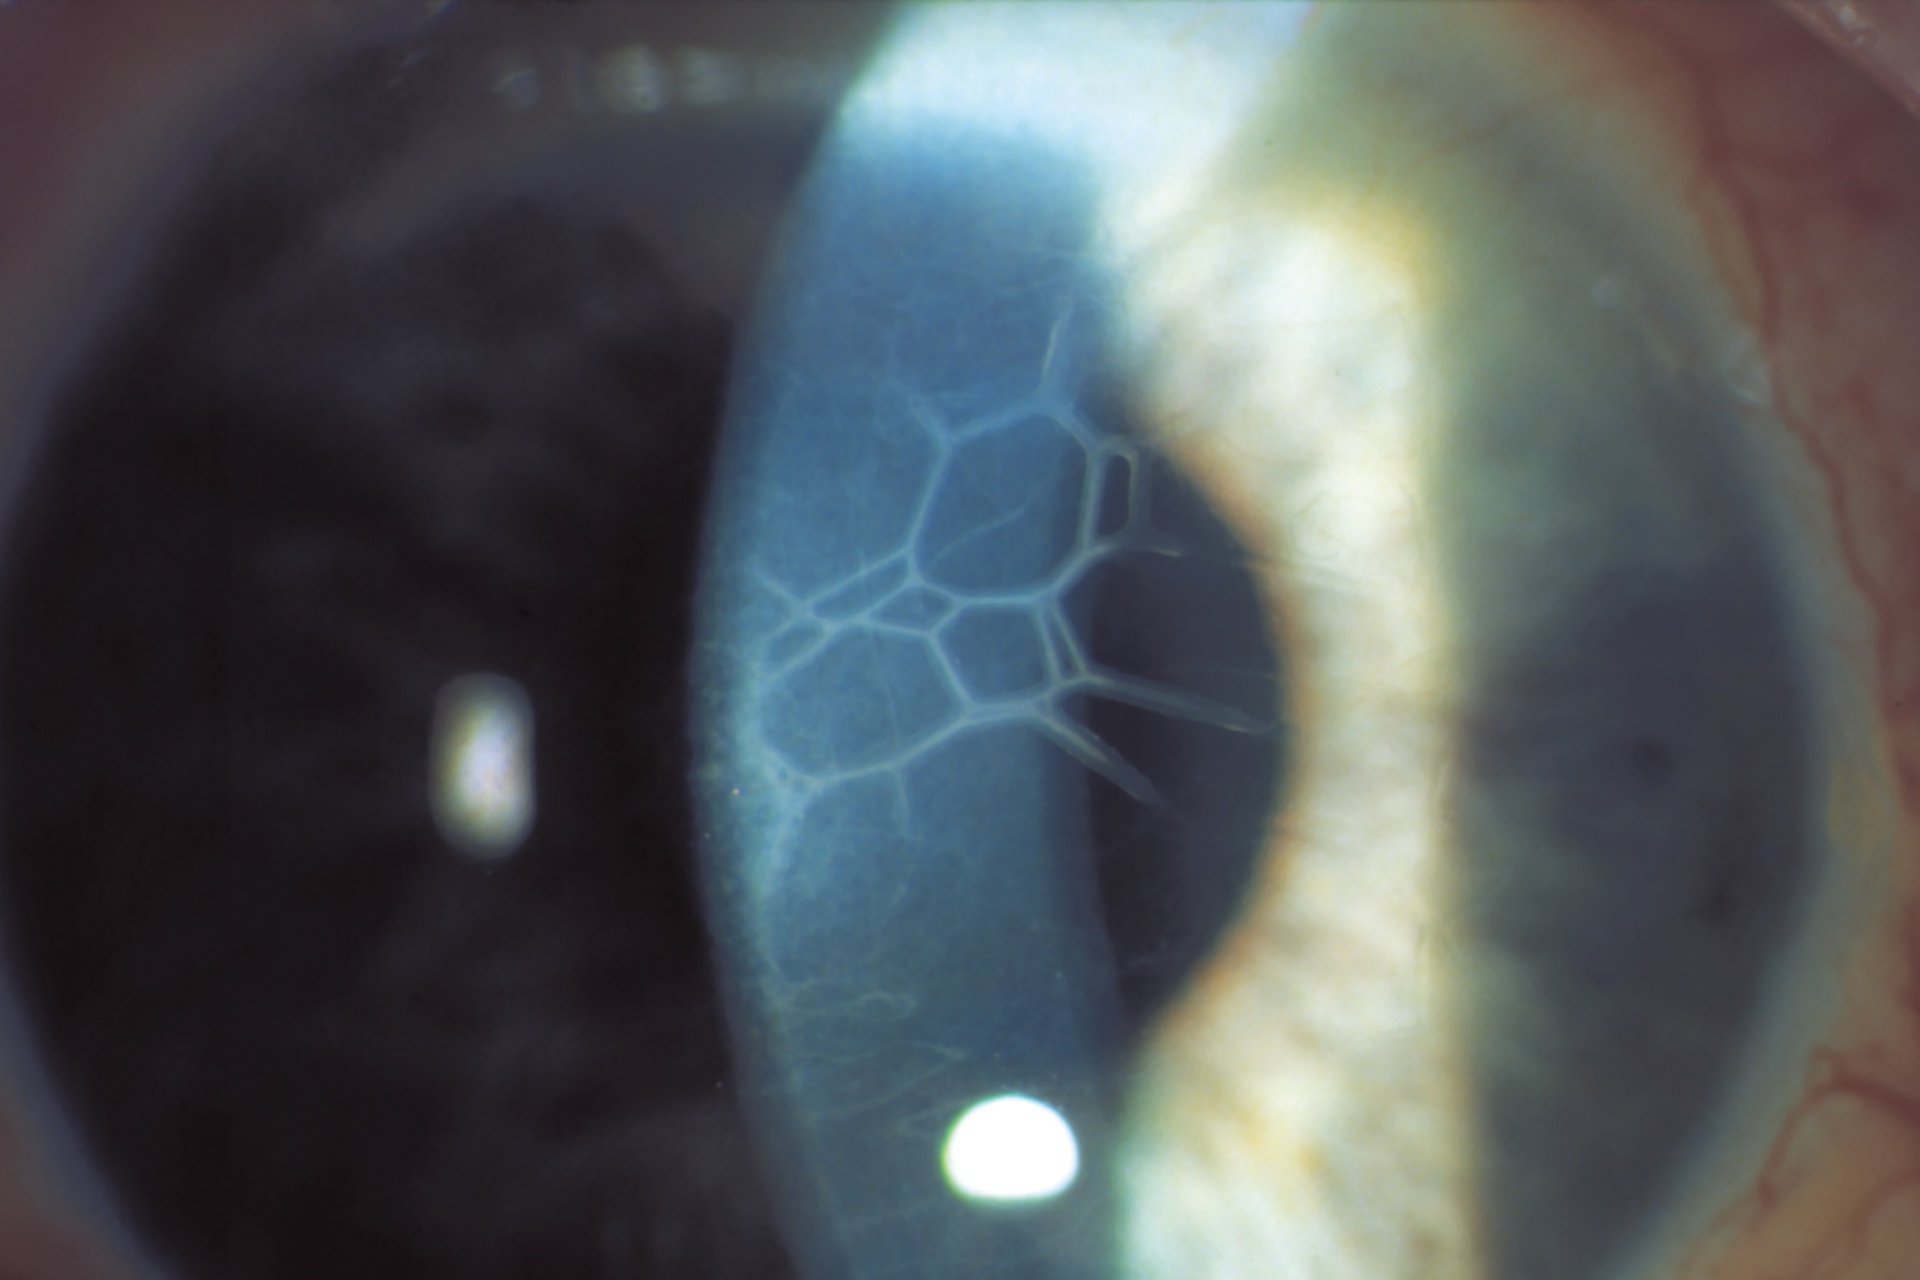 Corneal structures in direct focal illumination